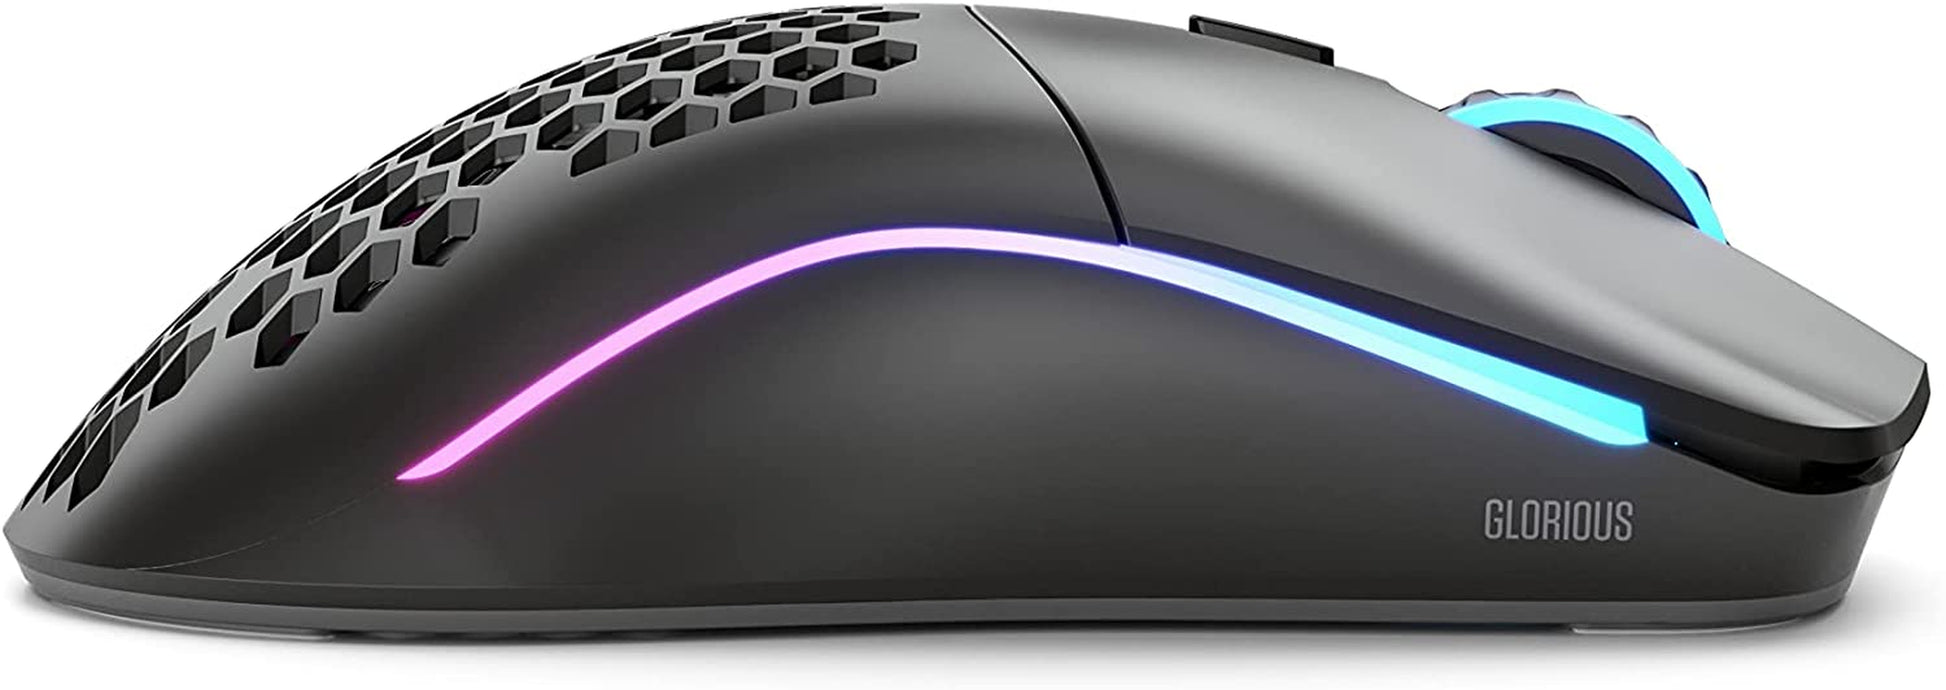 Model O Wireless Gaming Mouse - RGB 69G Lightweight Wireless Gaming Mouse (Matte Black)